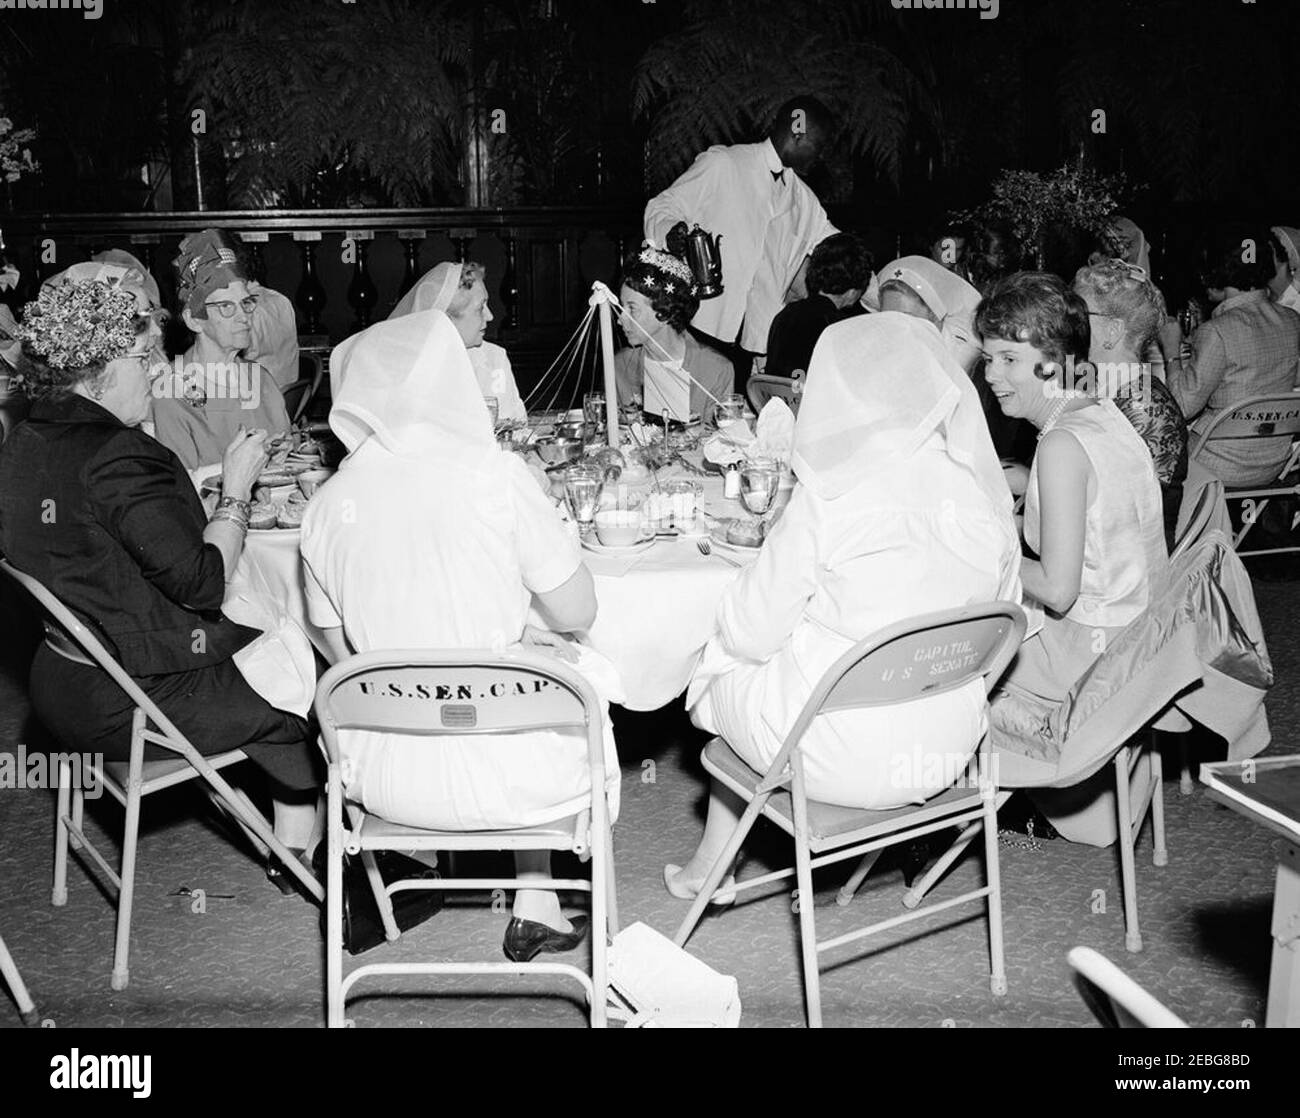 First Lady Jacqueline Kennedy (JBK) attends the Senate Ladiesu0027 Red Cross Unit Luncheon pic